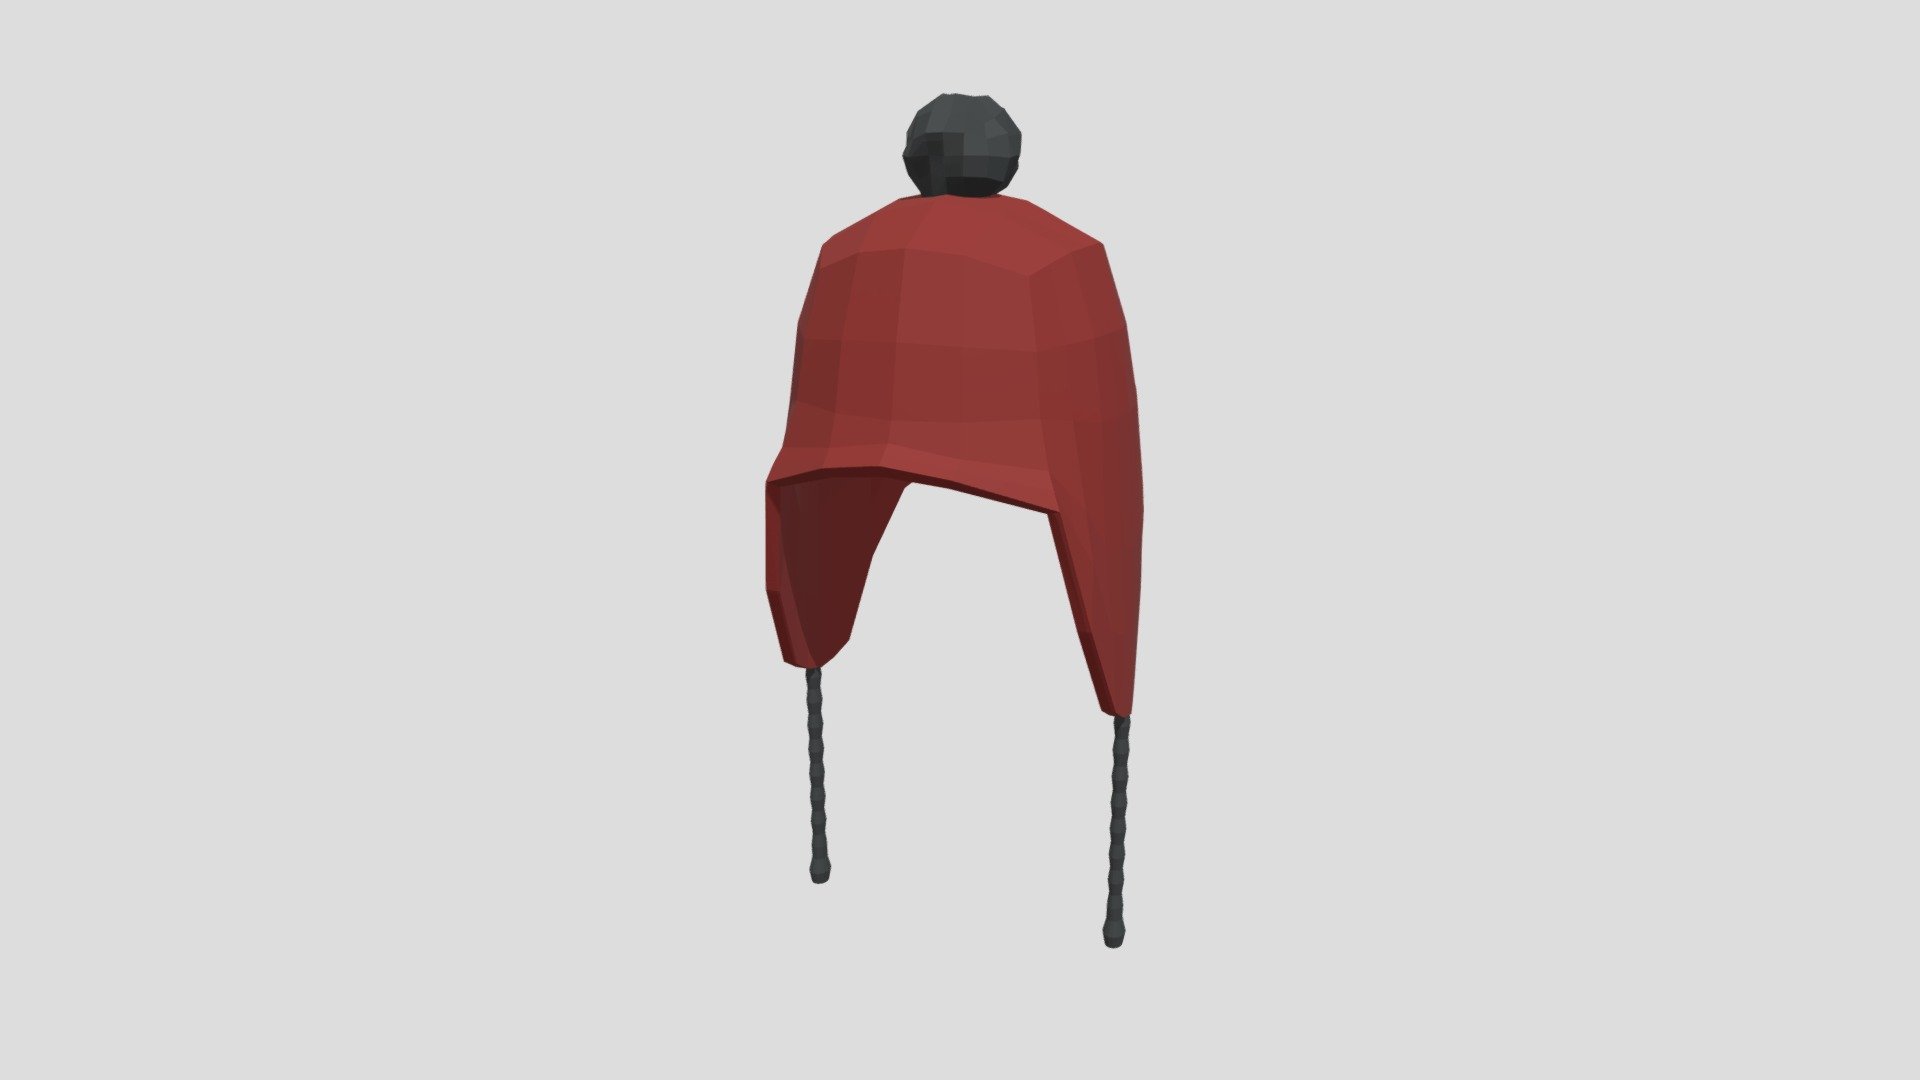 This is a low poly 3d model of a beanie cap. The low poly cap was modeled and prepared for low-poly style renderings, background, general CG visualization presented as a mesh with quads.

Verts : 1.036 Faces: 1.014

This model have simple materials with diffuse colors.

No ring, maps and no UVW mapping is available.

The original file was created in blender. You will receive a 3DS, OBJ, FBX, blend, DAE, Stl.

All preview images were rendered with Blender Cycles. Product is ready to render out-of-the-box. Please note that the lights, cameras, and background is only included in the .blend file. The model is clean and alone in the other provided files, centred at origin and has real-world scale 3d model